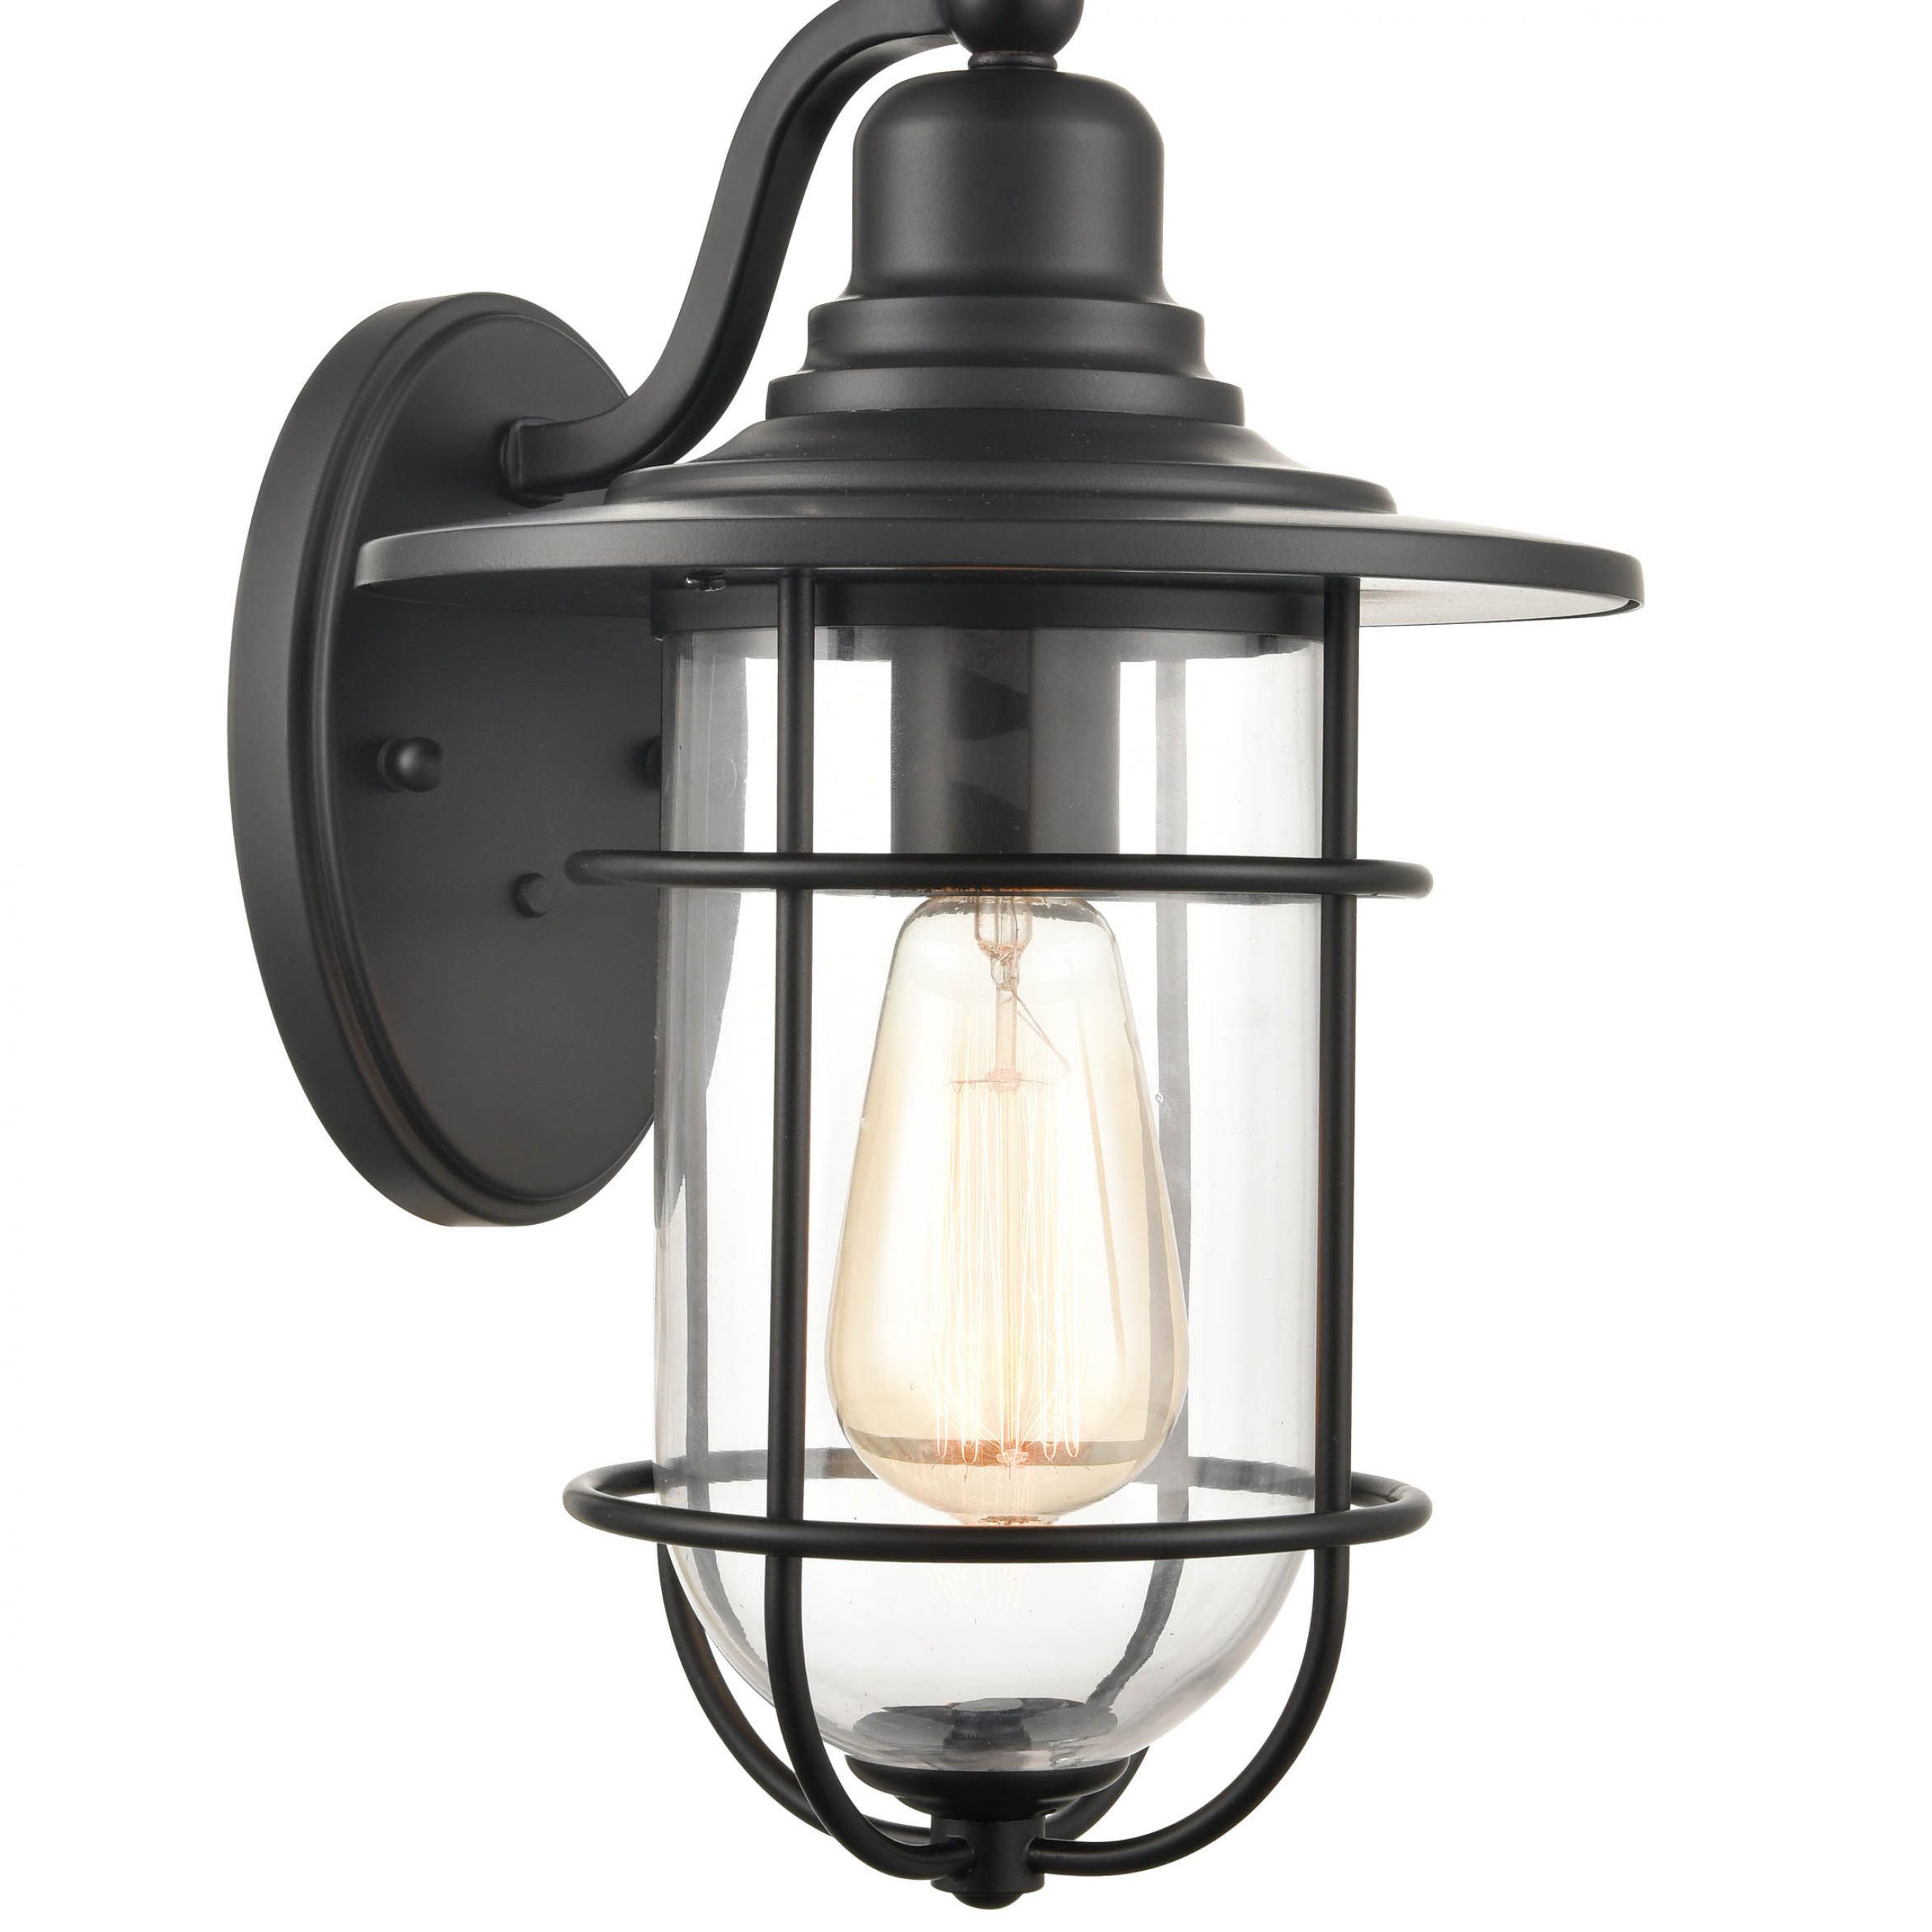 Famous Millennium Outdoor Wall Light In Powder Coat Black With Black Powder Coat Lantern Chandeliers (View 11 of 15)